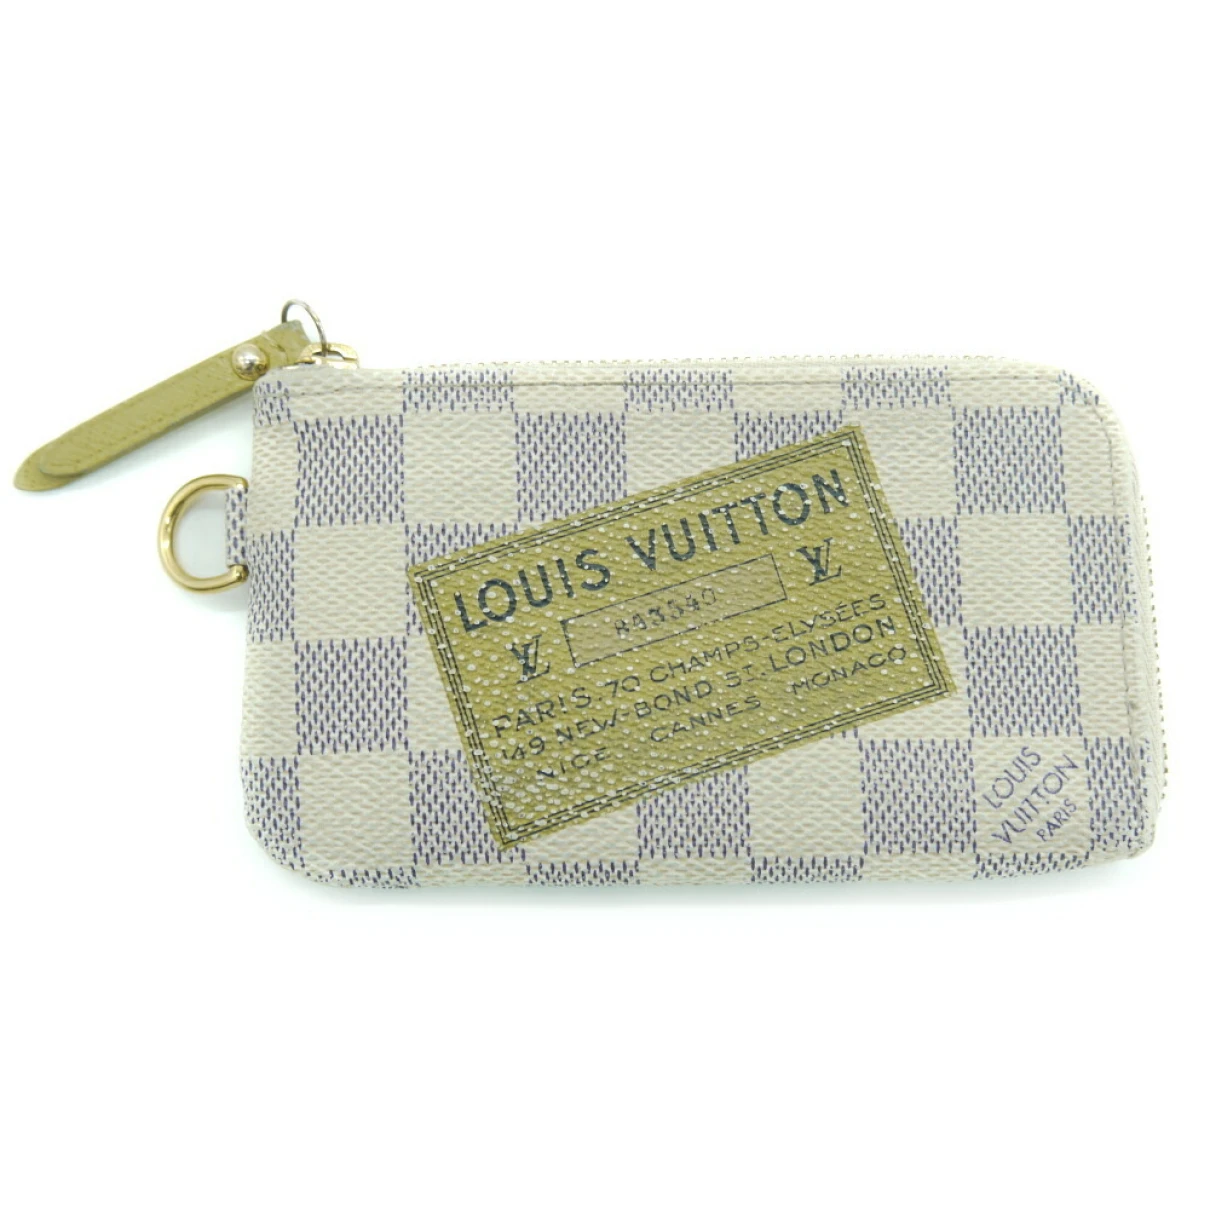 accessories Louis Vuitton purses, wallets & cases for Female Other. Used condition